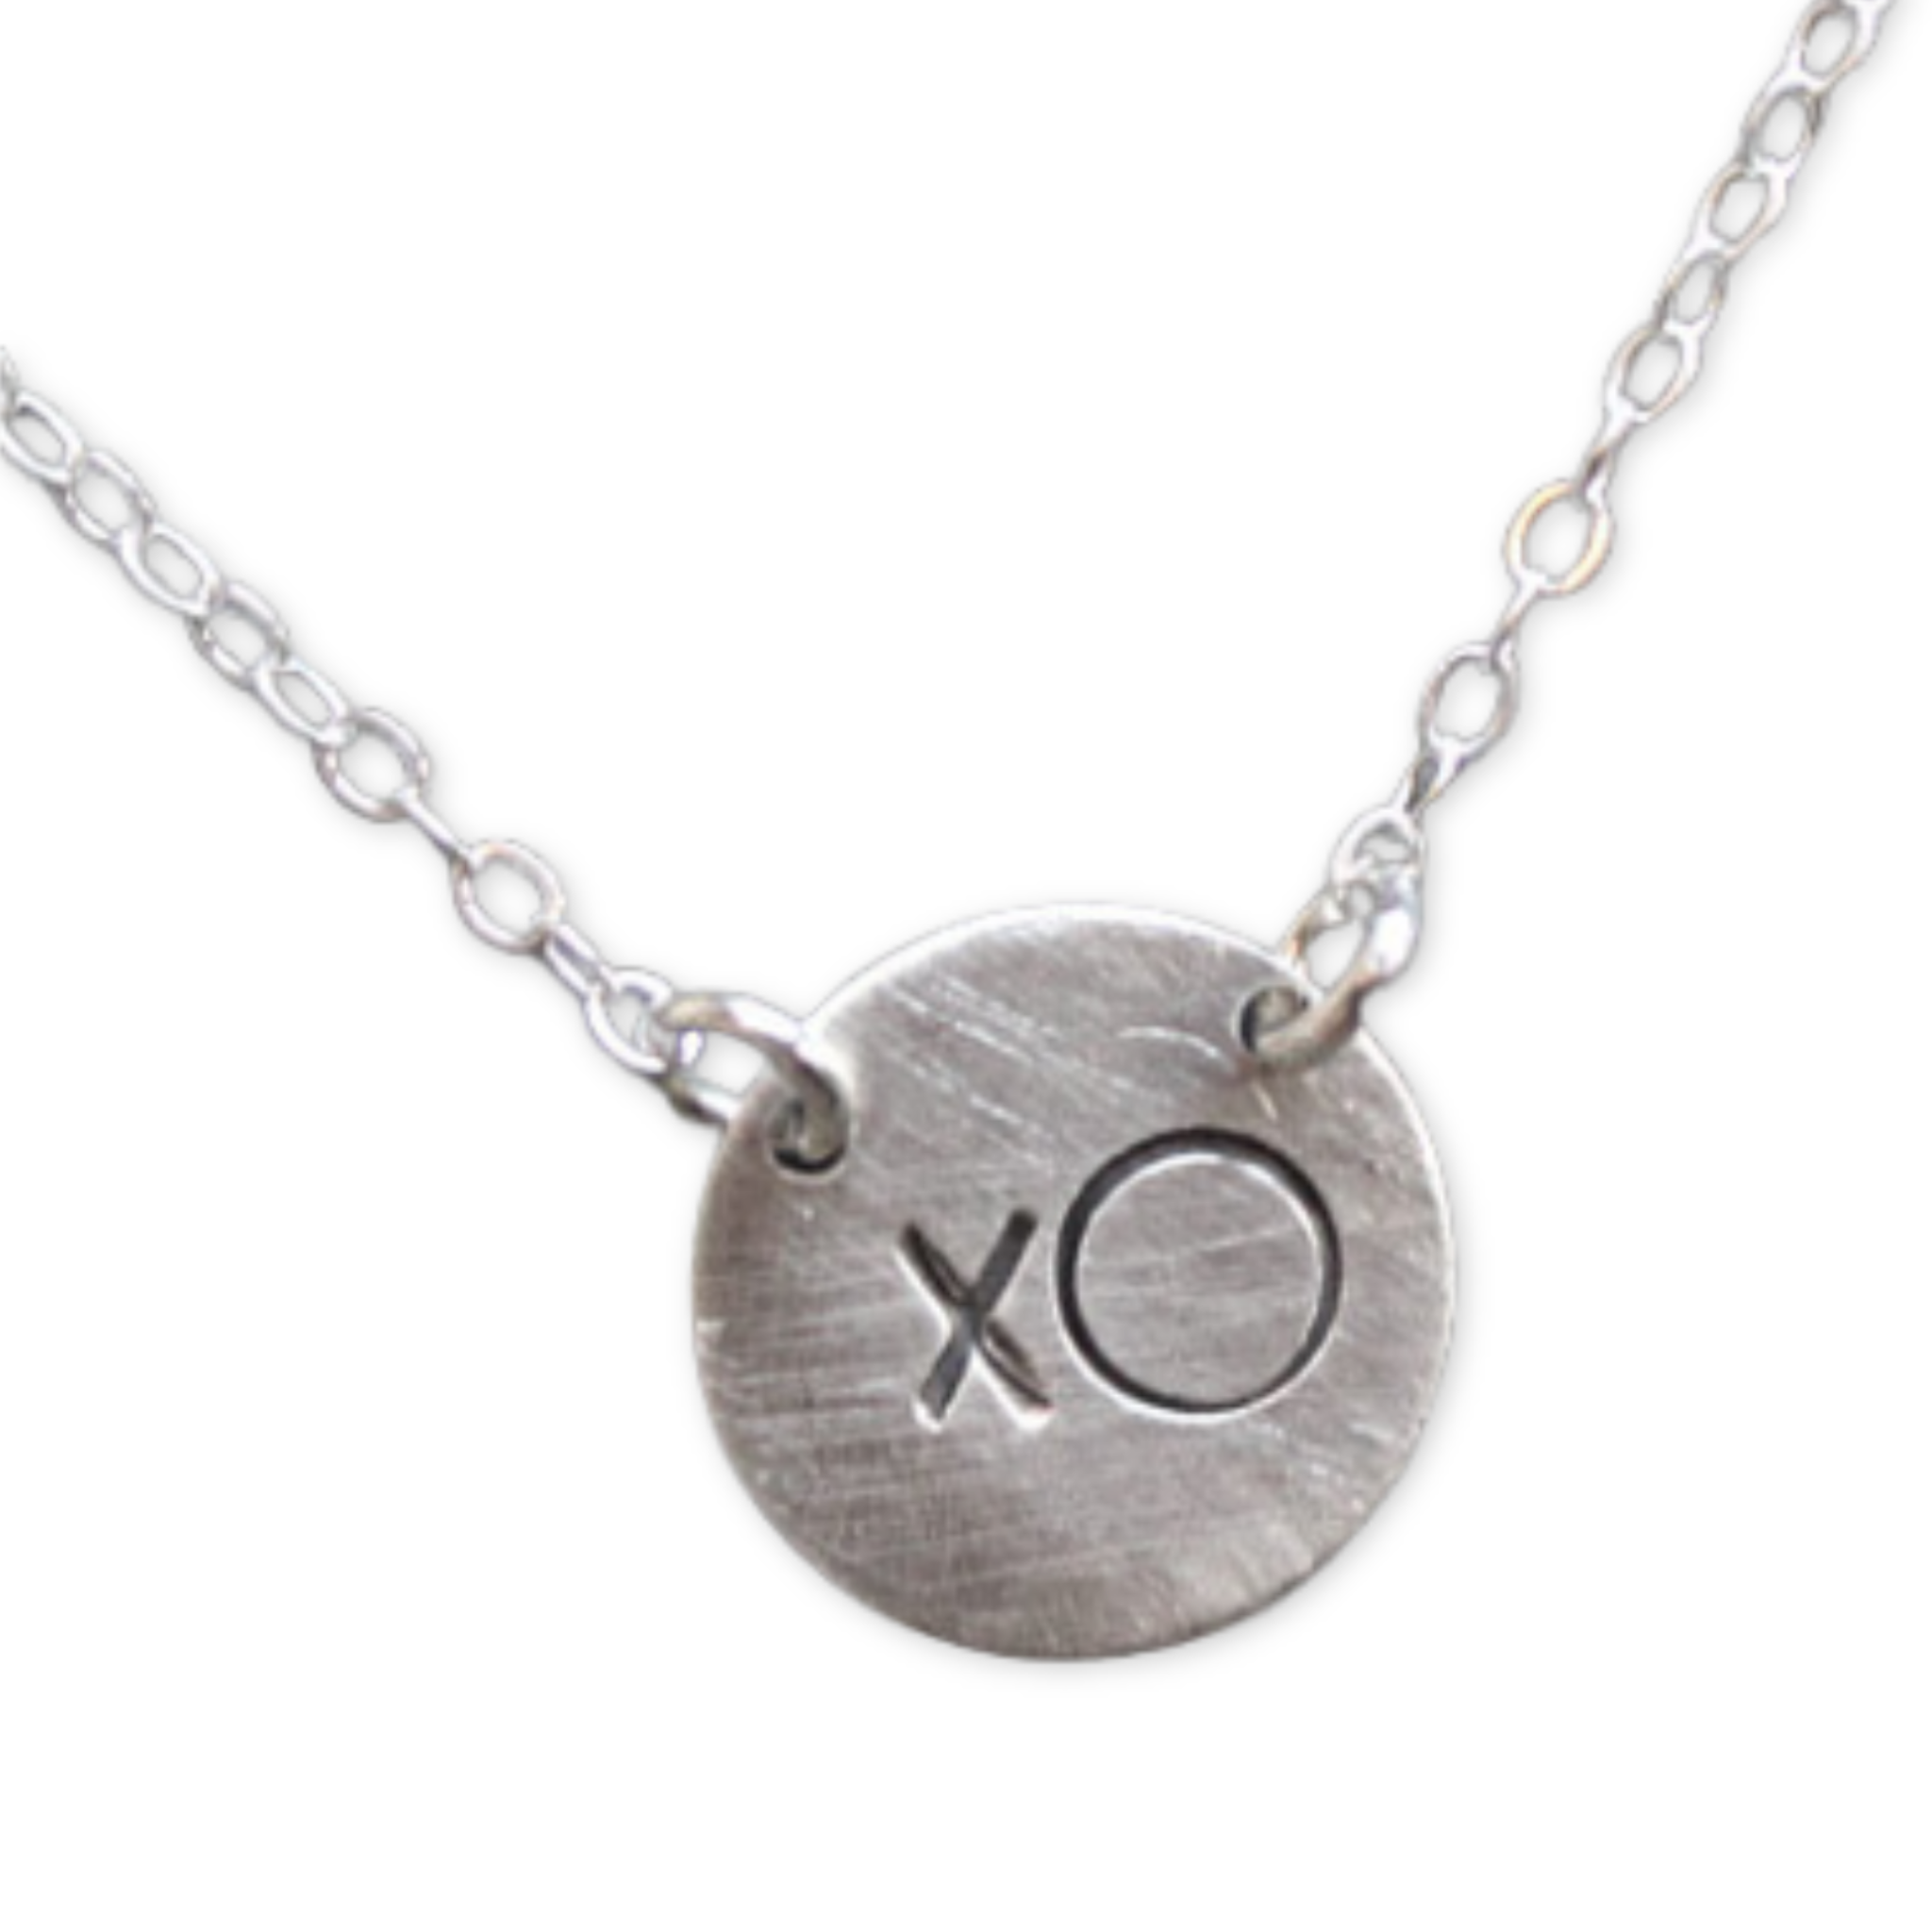 round disc pendant with xo design on a silver chain